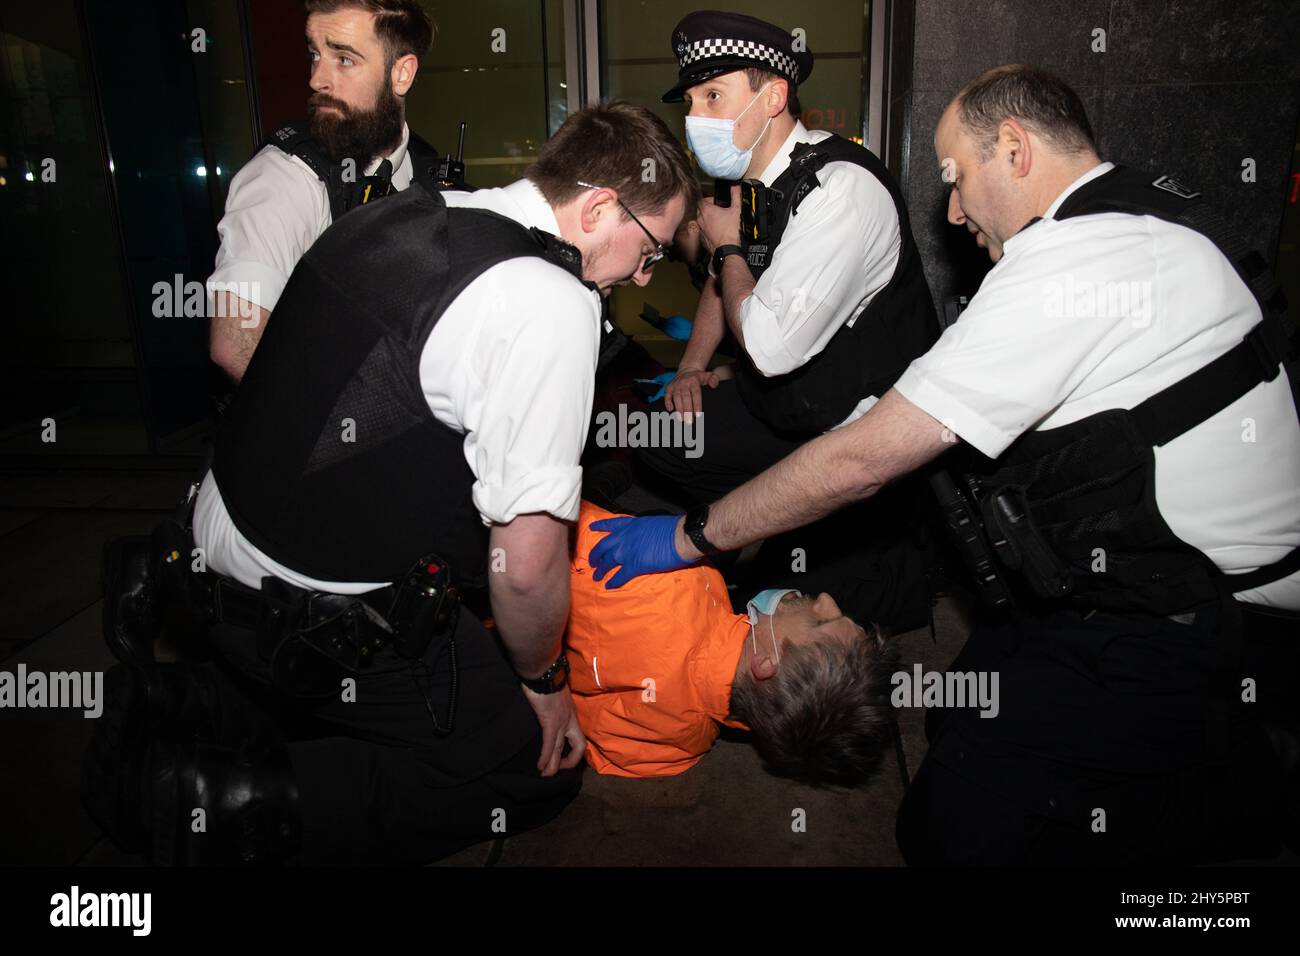 London, England, UK 14 March 2022 One man protest at the Department of Transport against HS2 and the use of Russian oligarch money in its construction. During the protest a supporter, Dr Larch Maxey, who came along to observe, is violently arrested. Credit: Denise Laura Baker/Alamy Live News Stock Photo